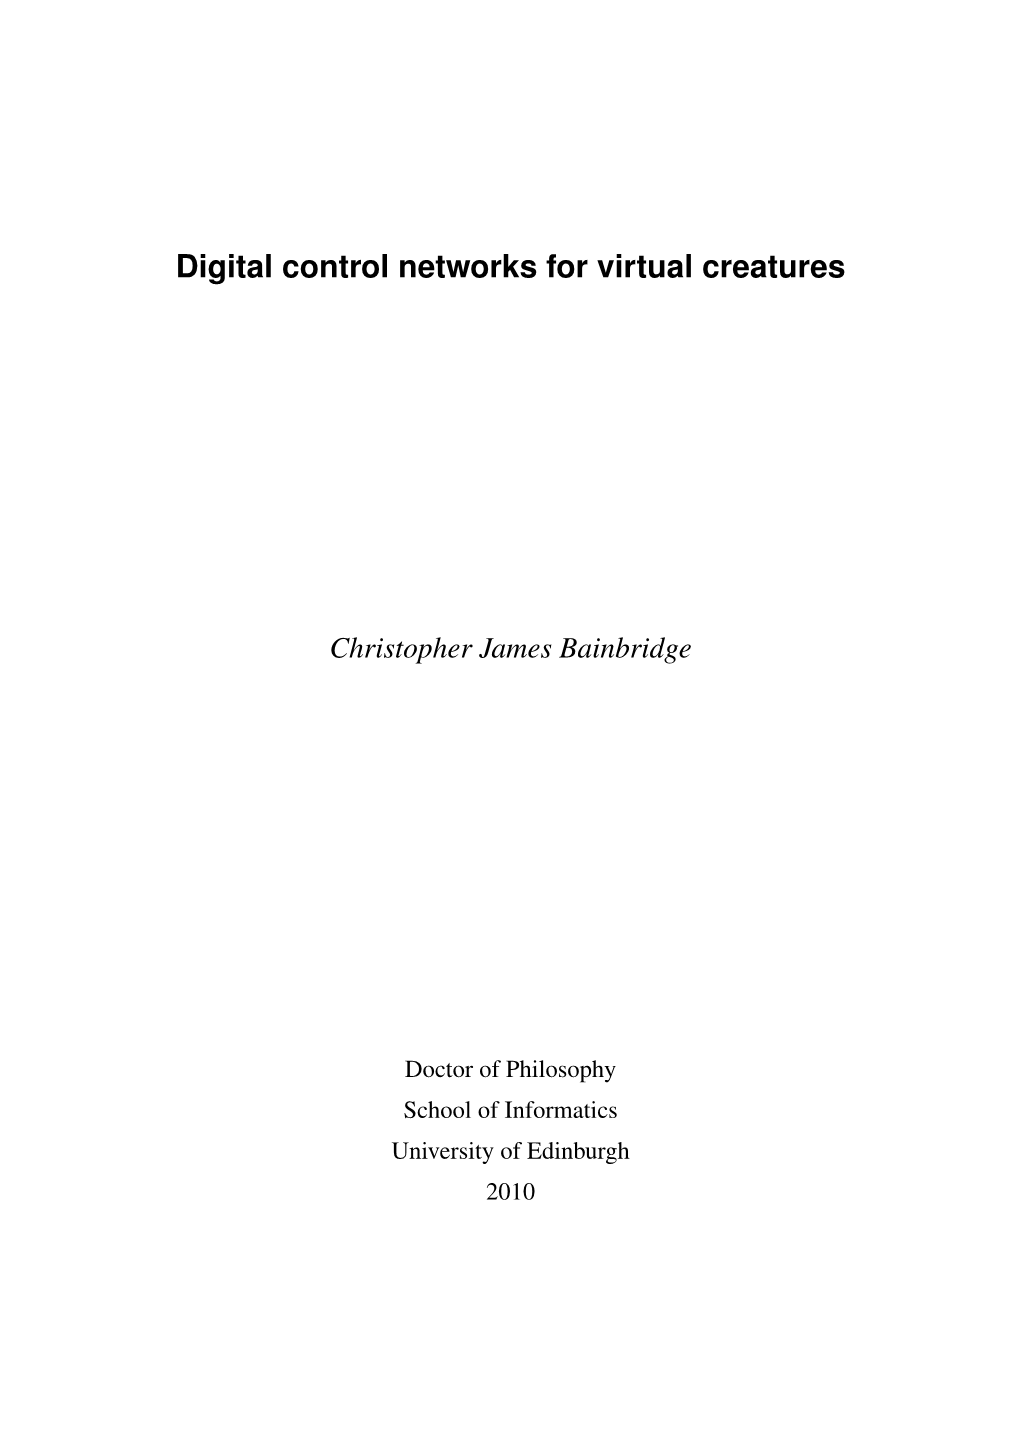 Digital Control Networks for Virtual Creatures